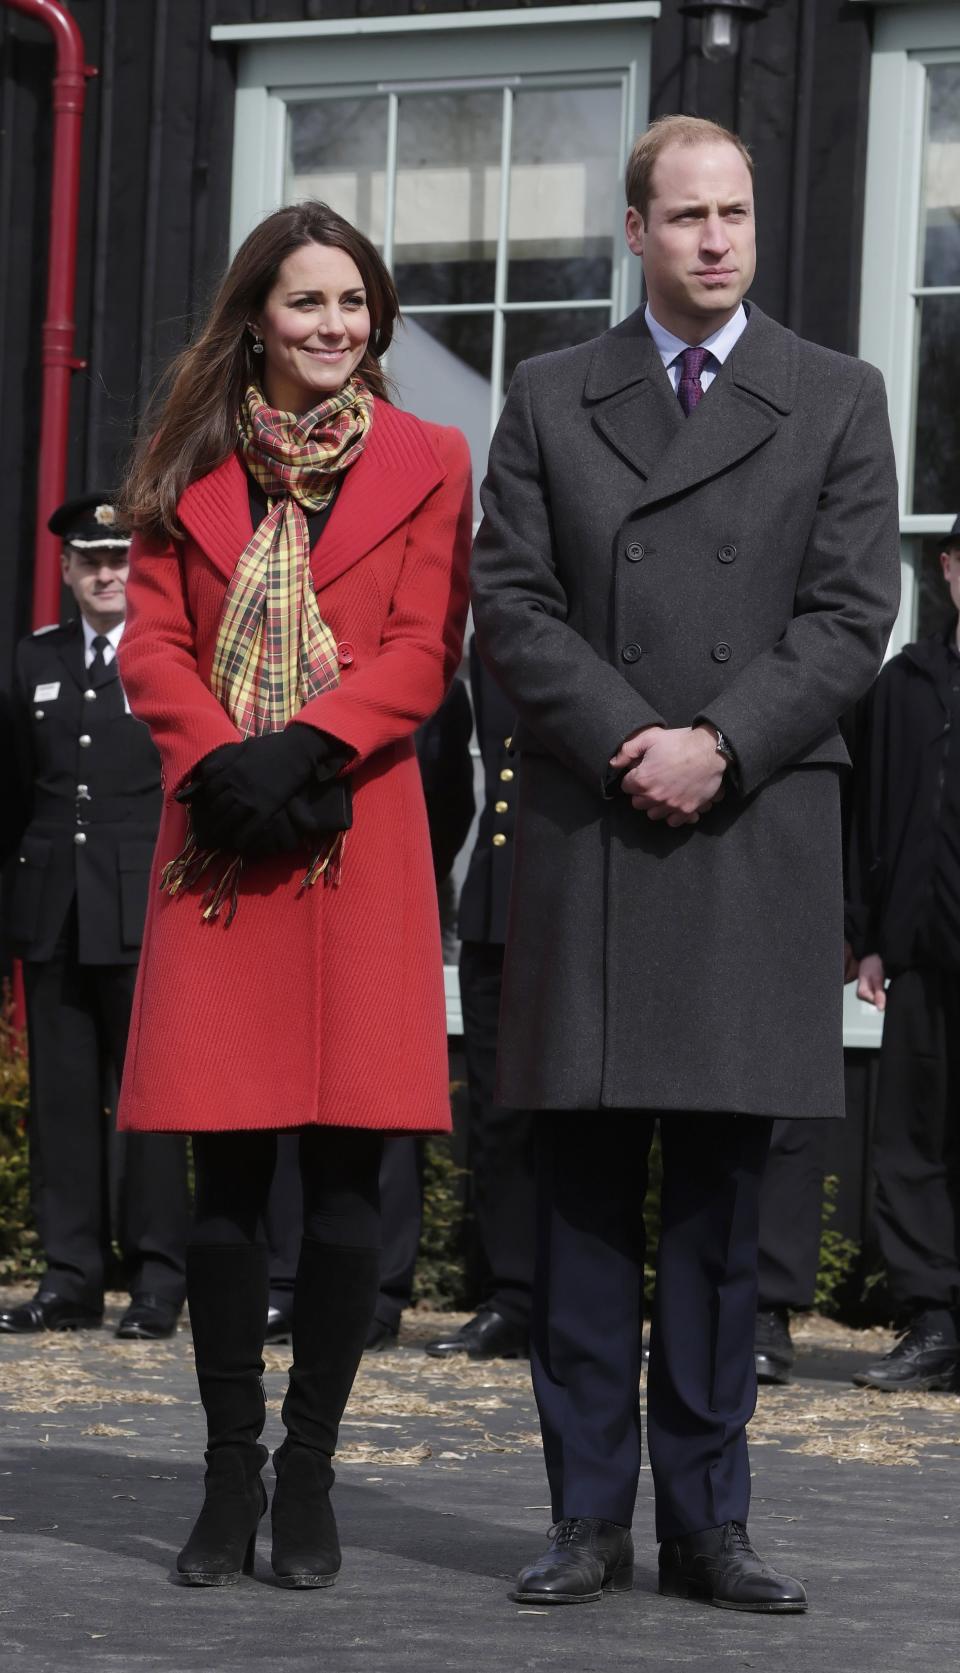 Prince William and Kate Middleton in March 2013.